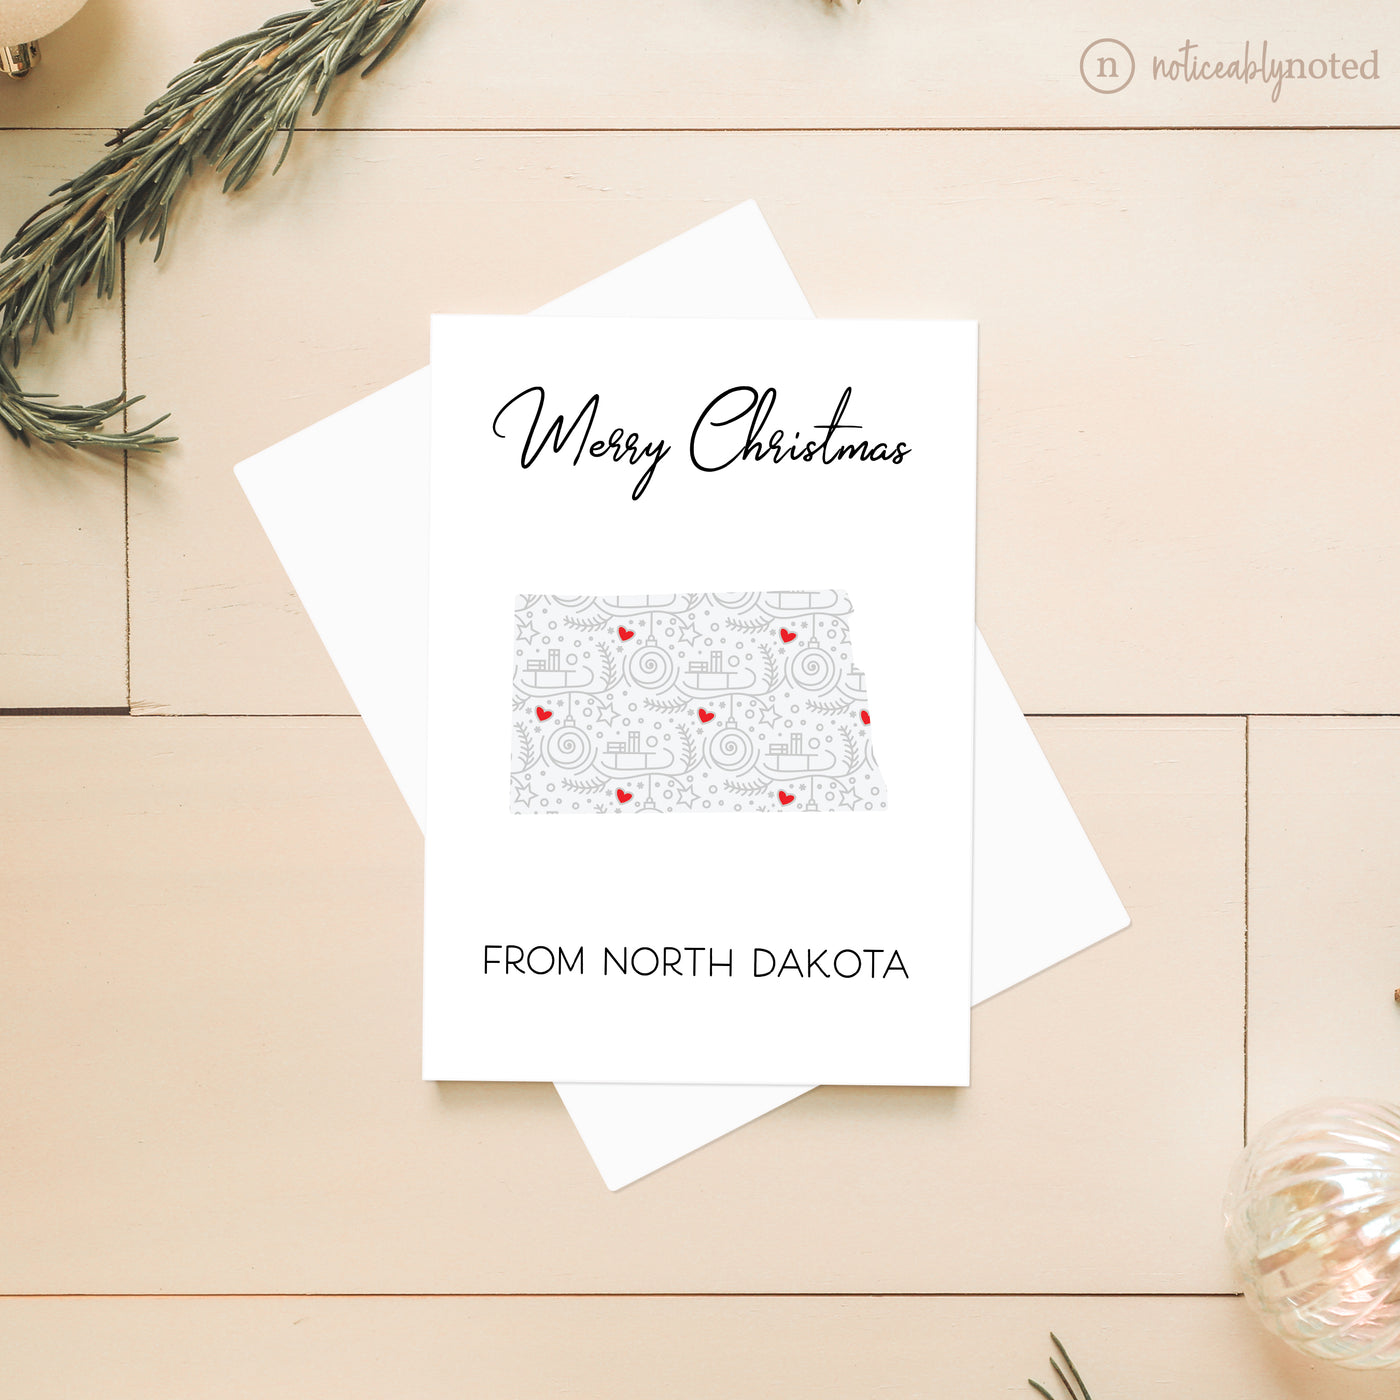 North Dakota Christmas Cards | Noticeably Noted